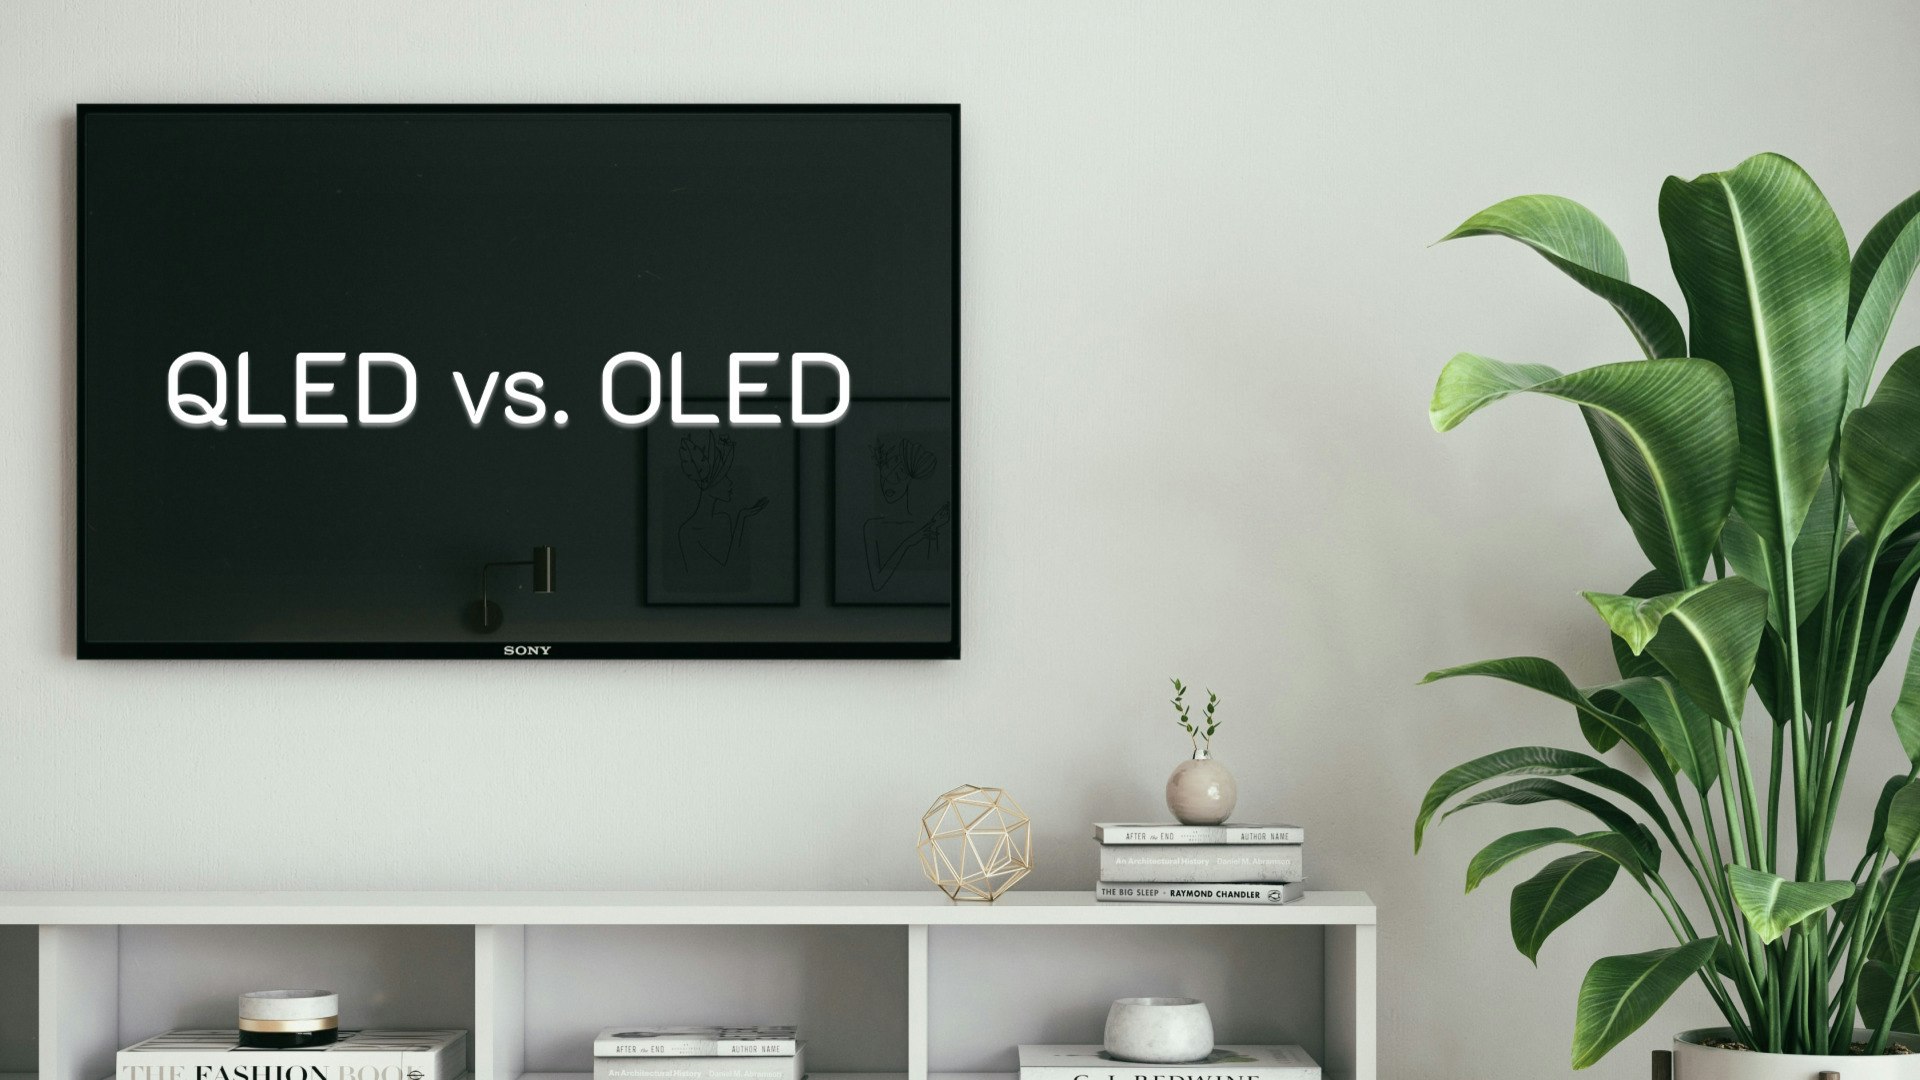 TV with "QLED vs. OLED" text displayed on the screen